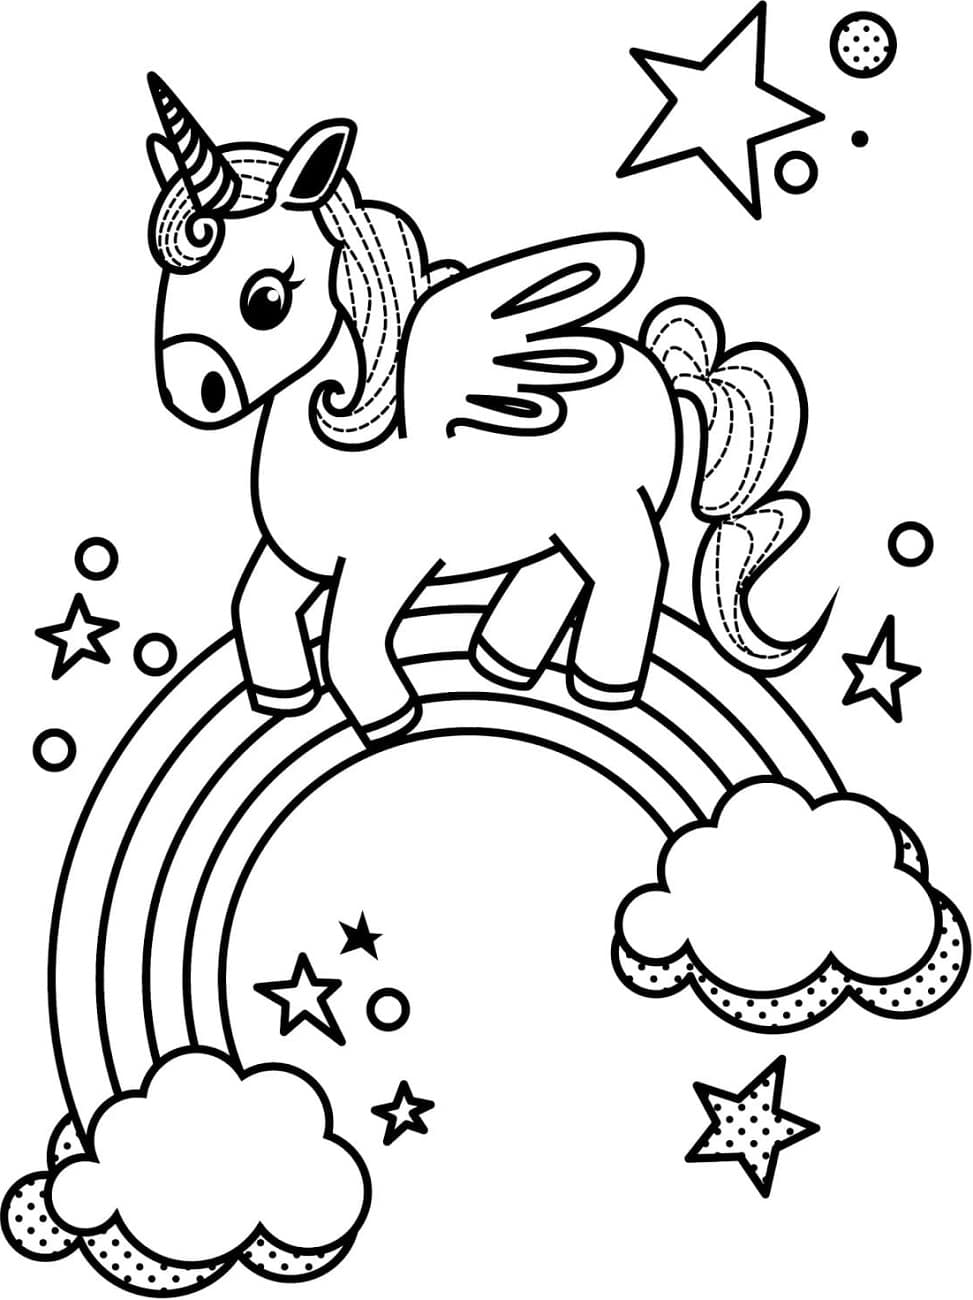 Free Printable Unicorn Pictures To Color